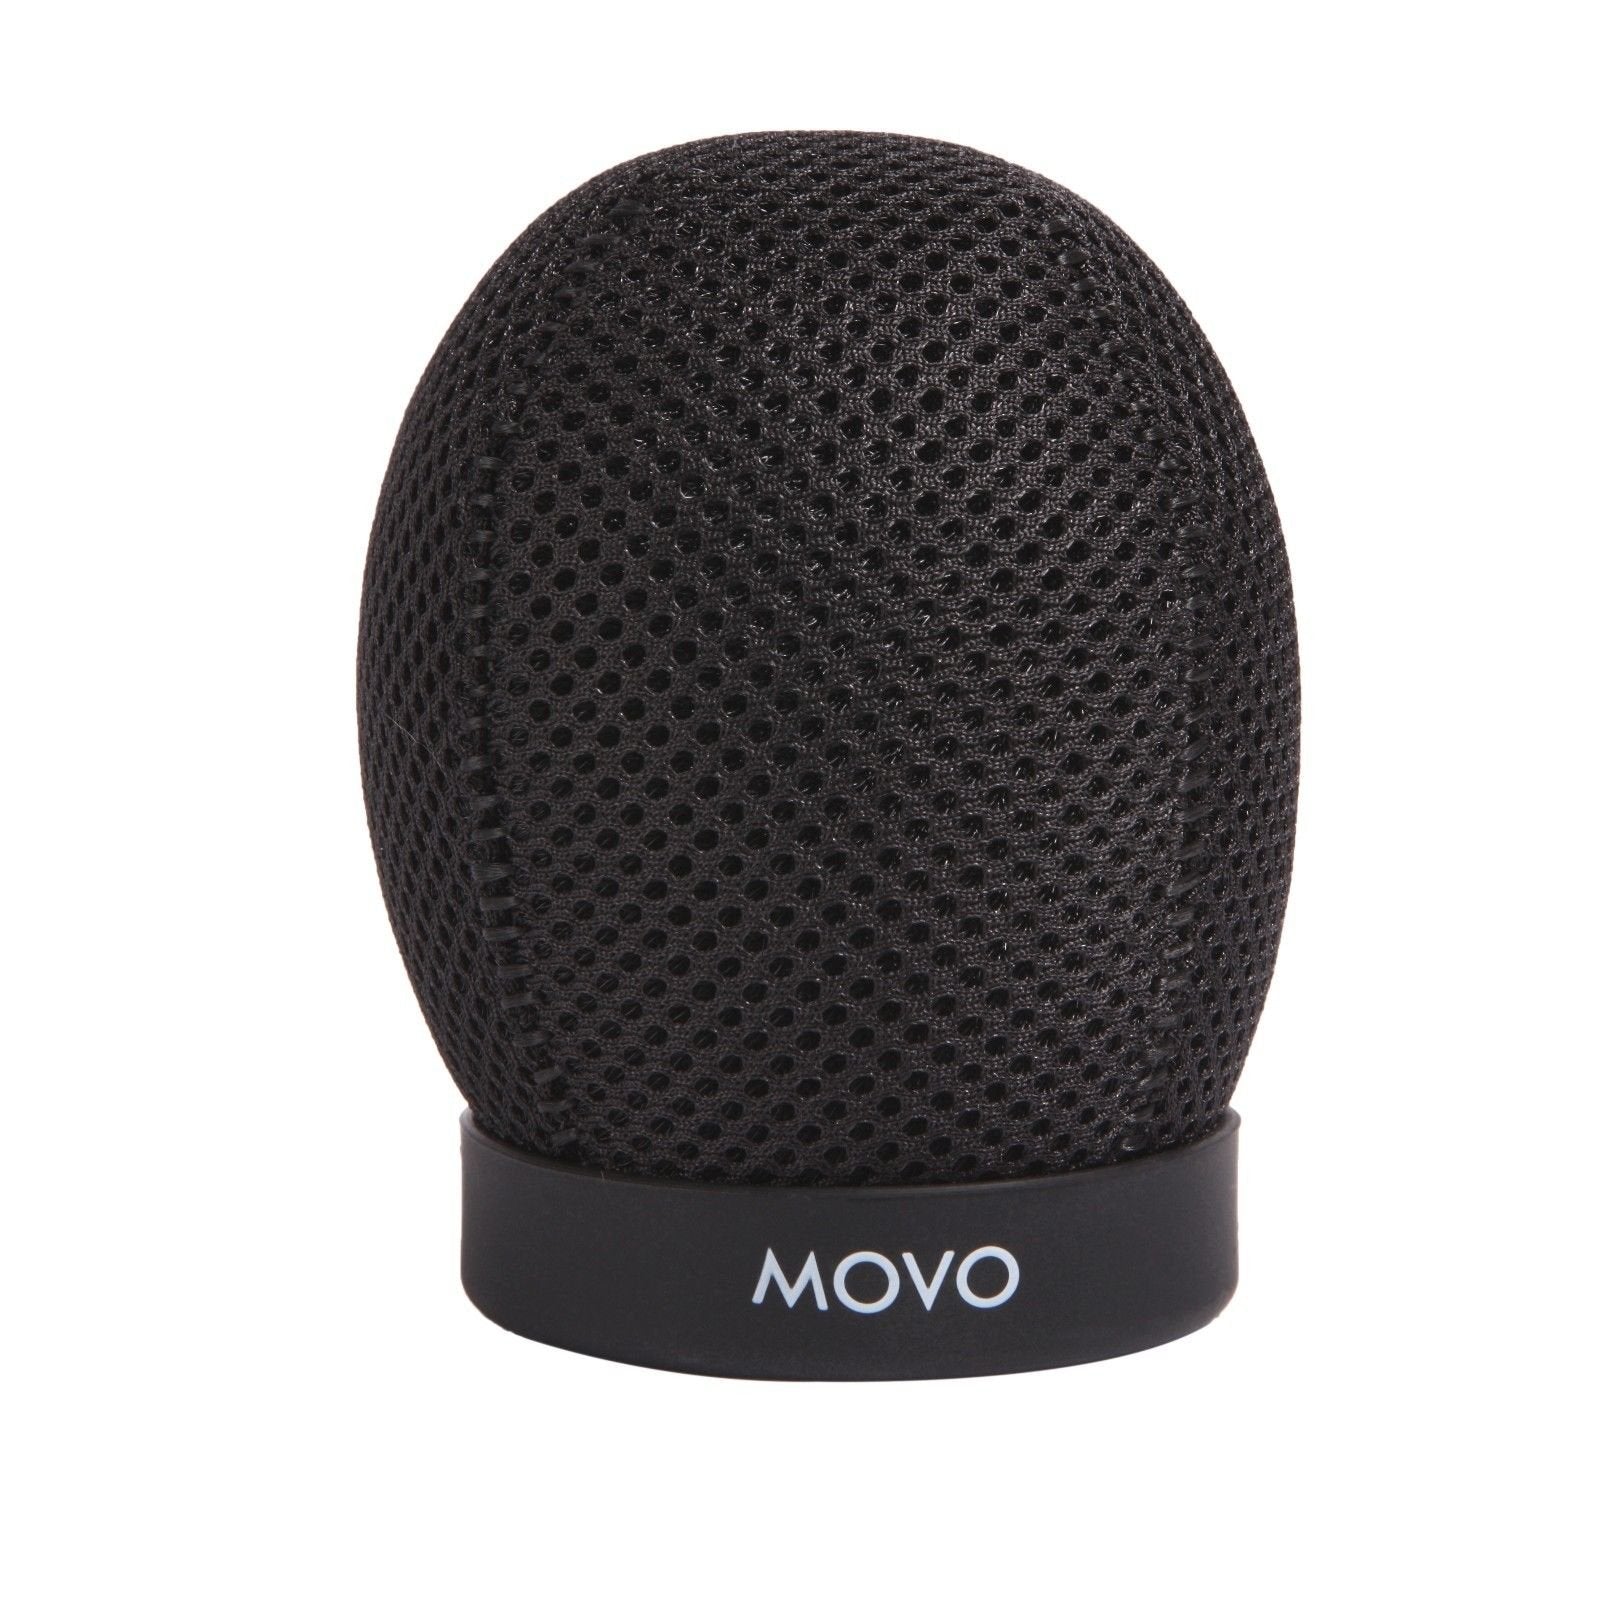 Movo WST220 Professional Premium Quality Ballistic Nylon Windscreen with Acoustic Foam Technology for Shotgun Microphones up to 20cm Long (Fits R�de NTG-3)  - Like New